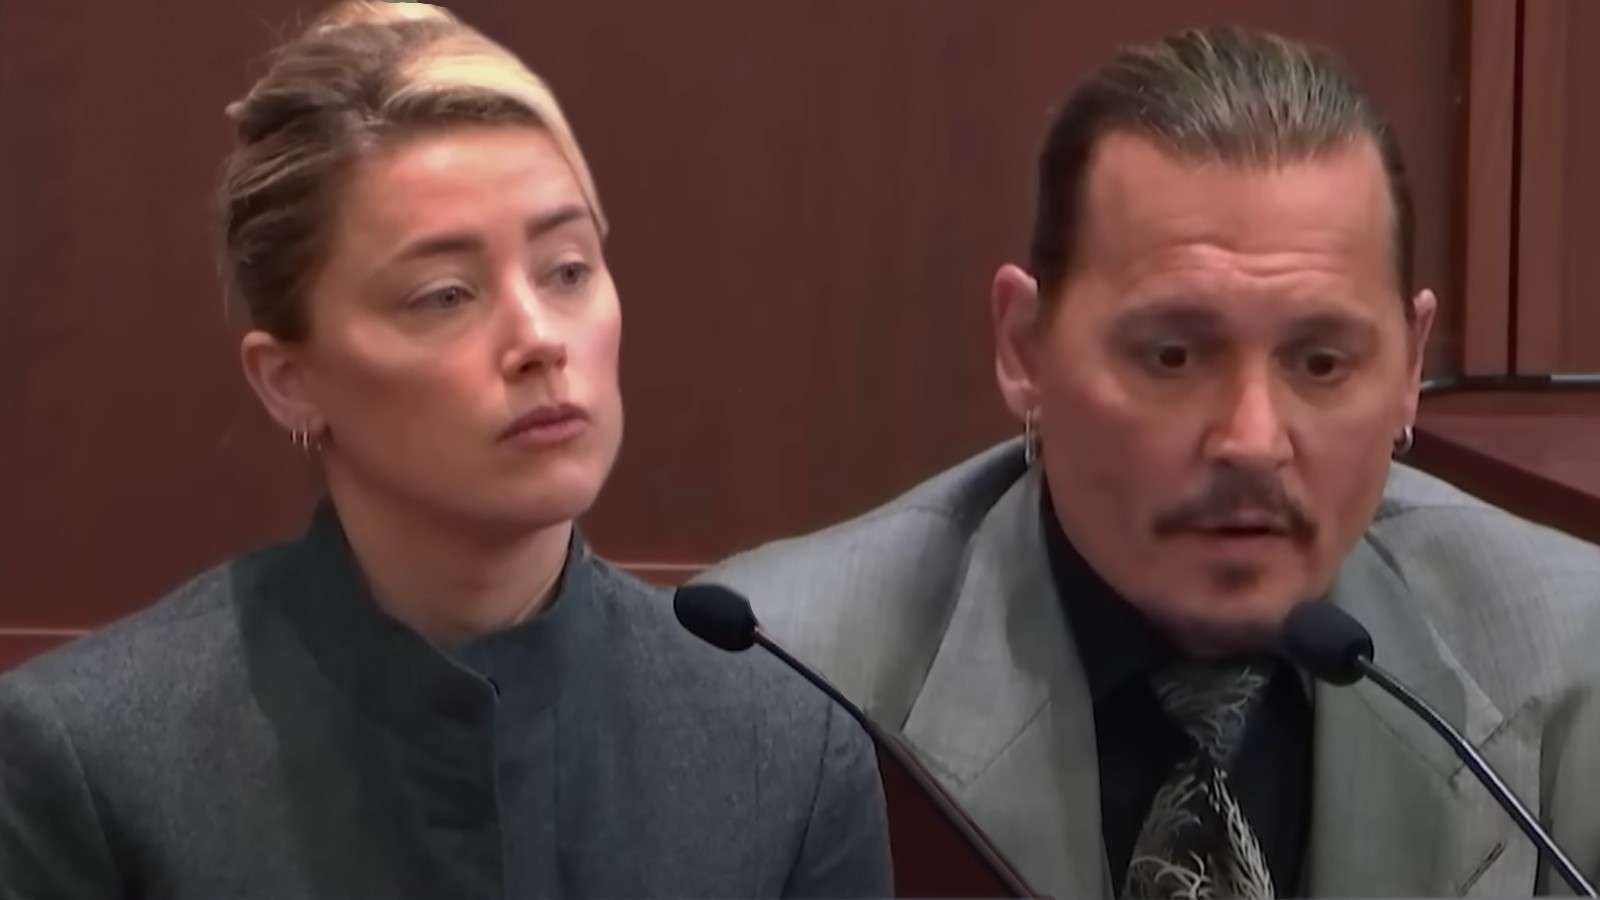 Amber Heard and Johnny Depp giving testimony at their defamation trial